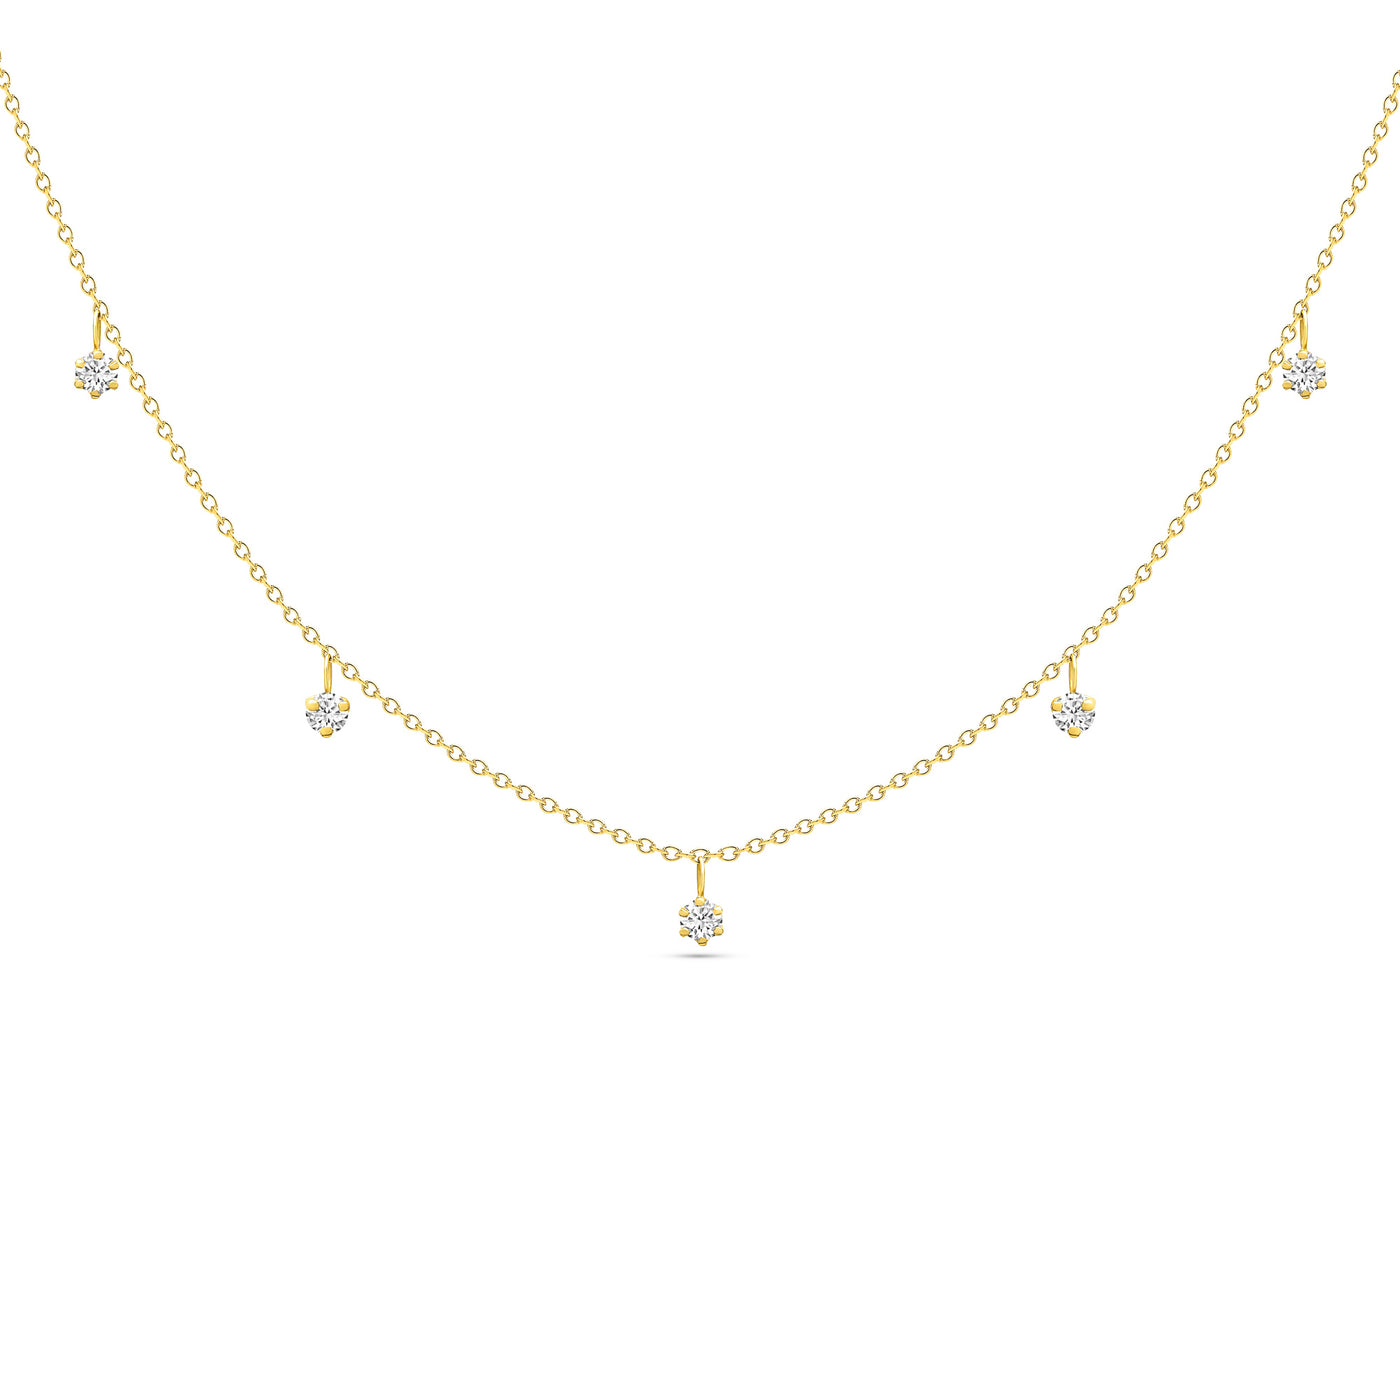 14K Solid Gold Alternating Five Diamond Anniversary Necklace